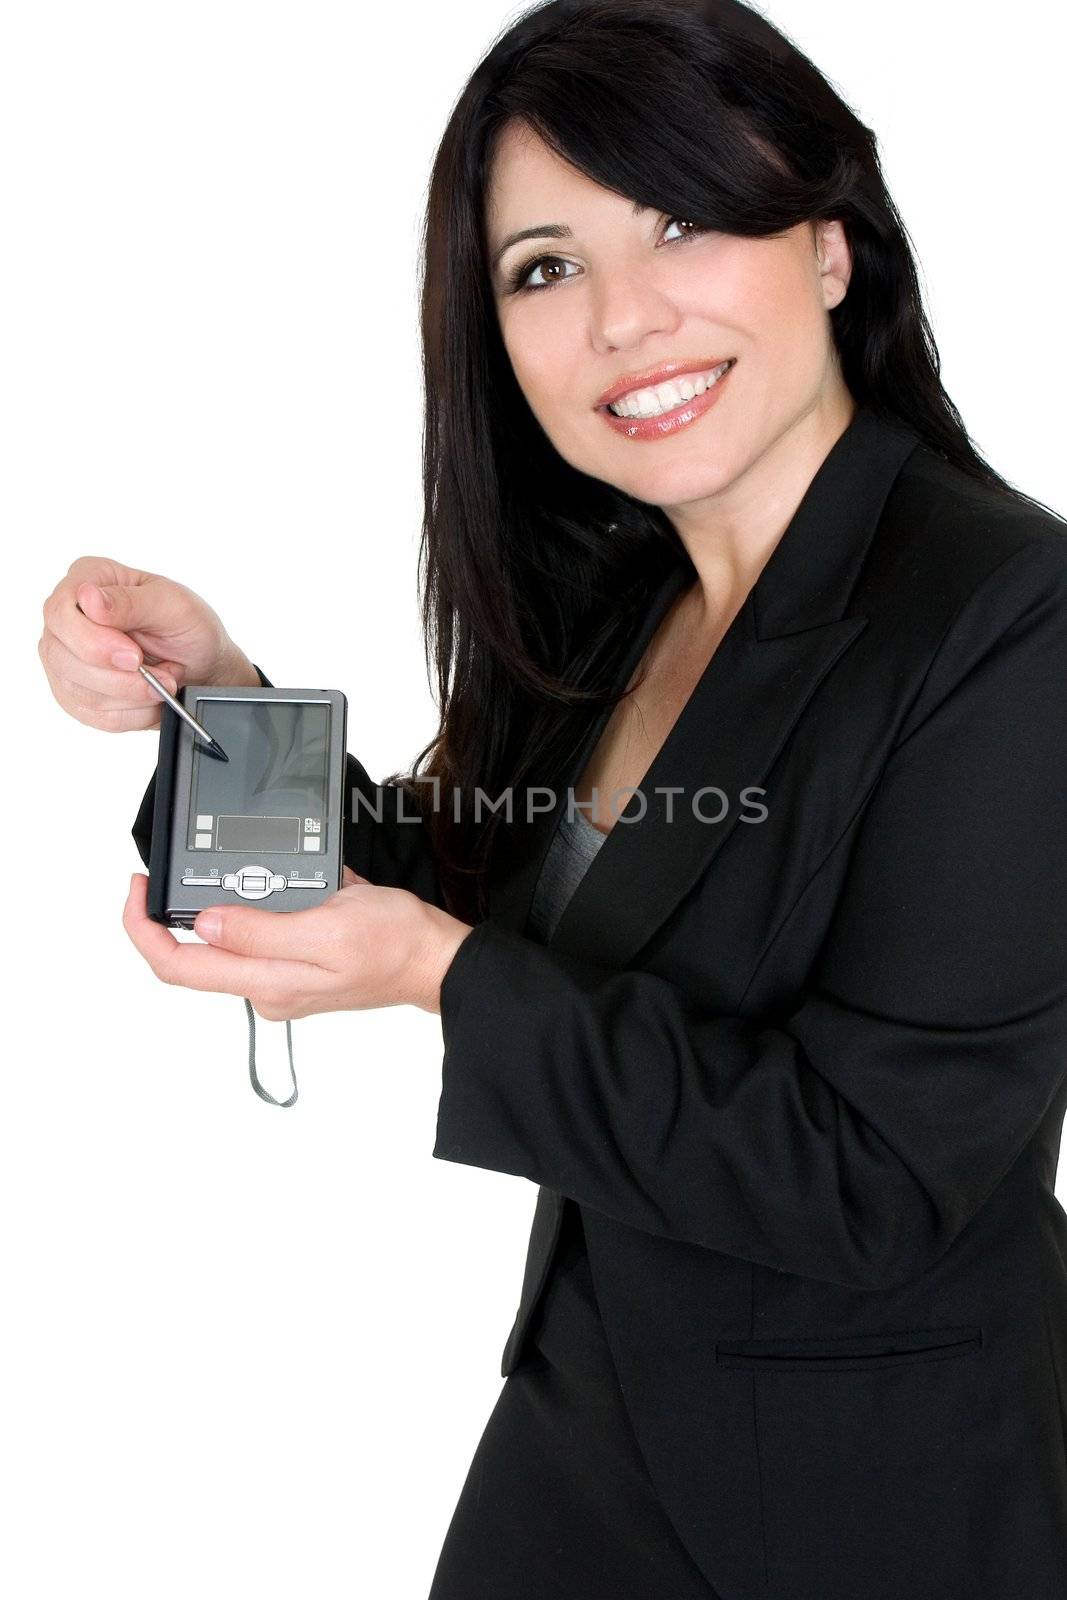 Woman using or demonstrating an electronic product.